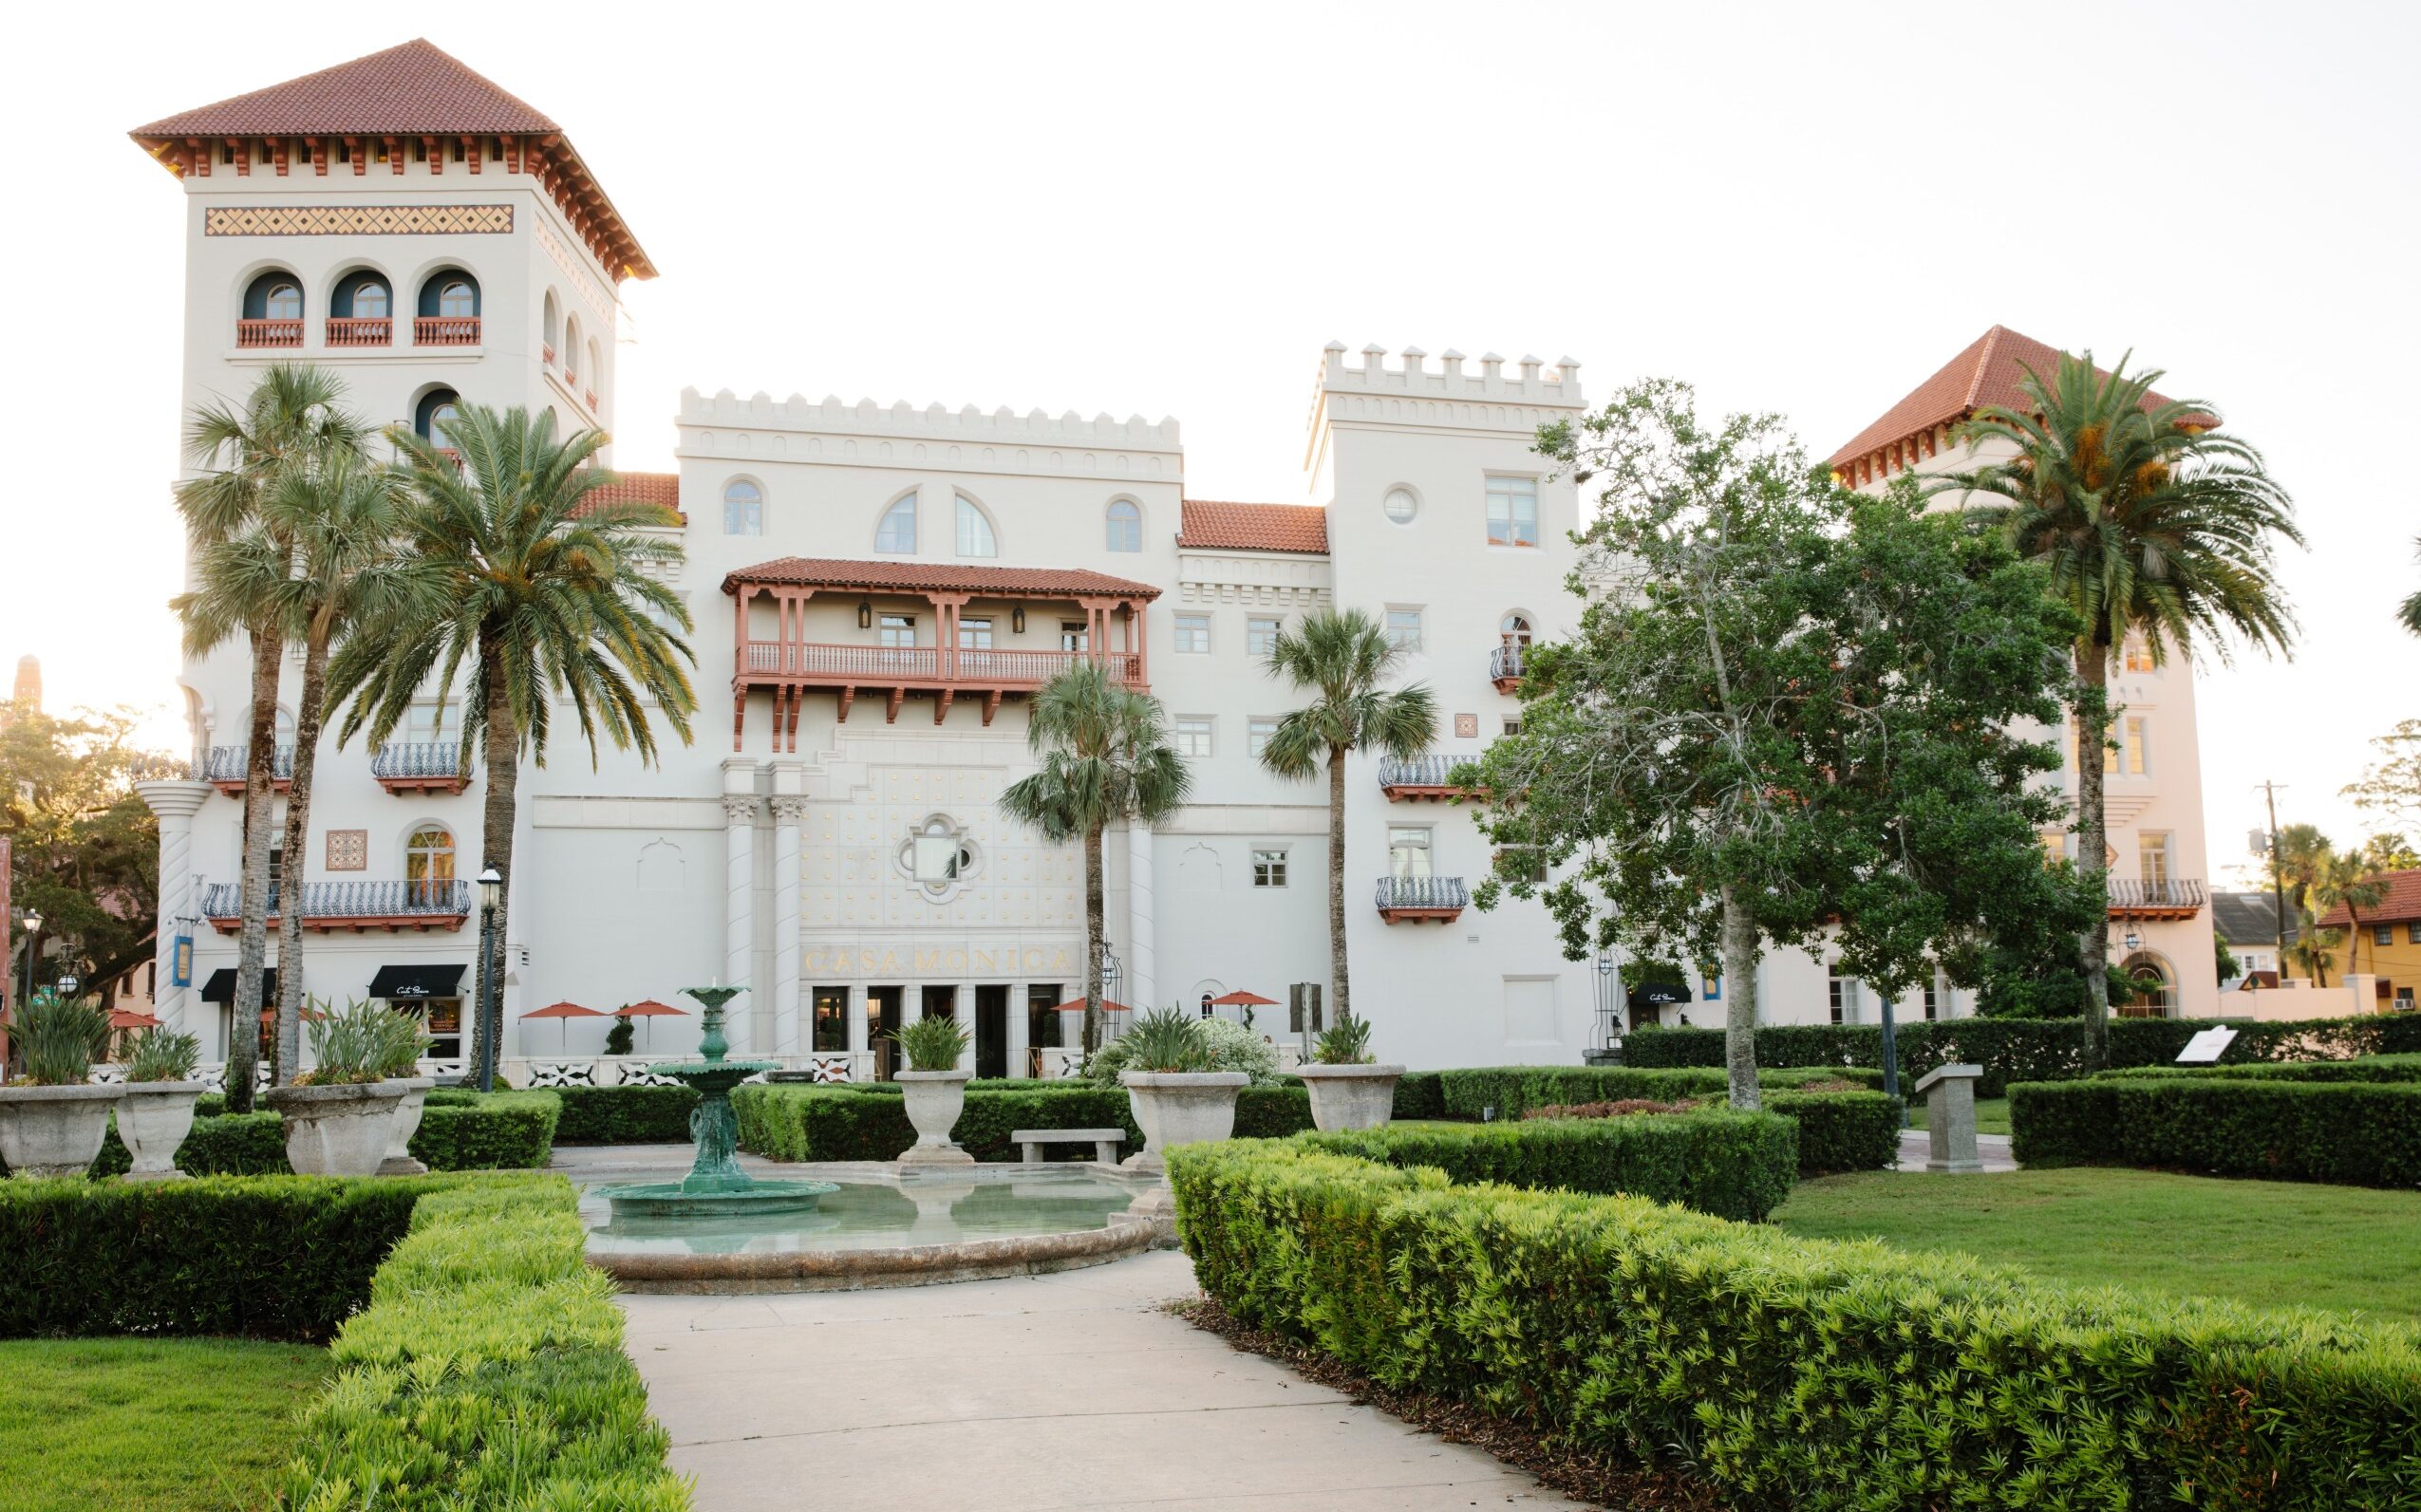 This St. Augustine Resort Combines Historic Posh with Coastal Vacation